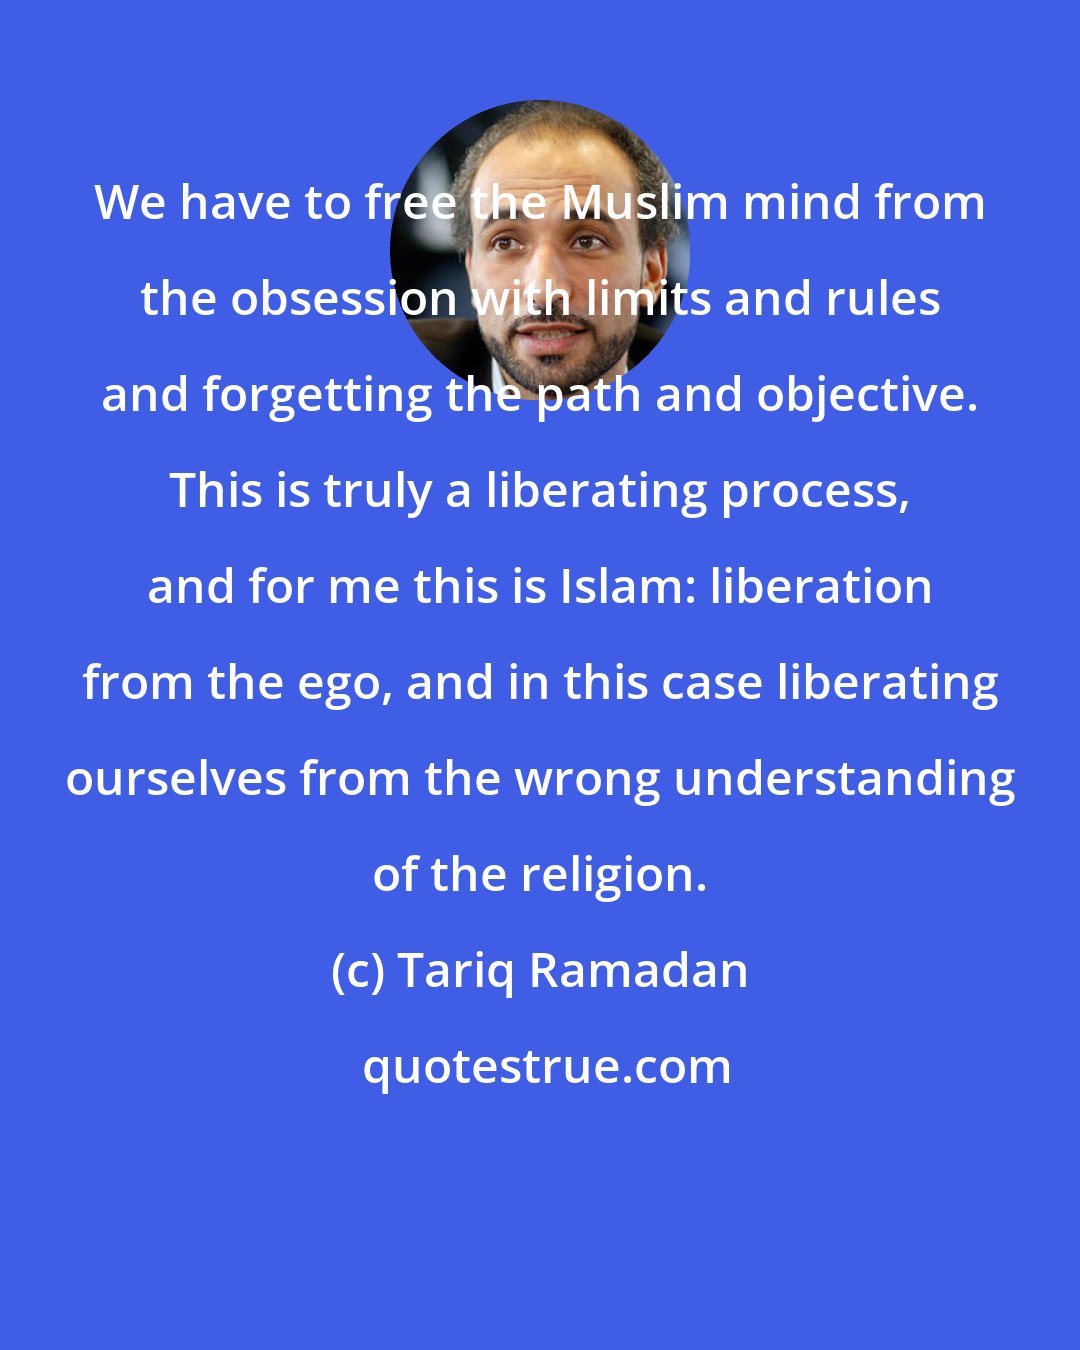 Tariq Ramadan: We have to free the Muslim mind from the obsession with limits and rules and forgetting the path and objective. This is truly a liberating process, and for me this is Islam: liberation from the ego, and in this case liberating ourselves from the wrong understanding of the religion.